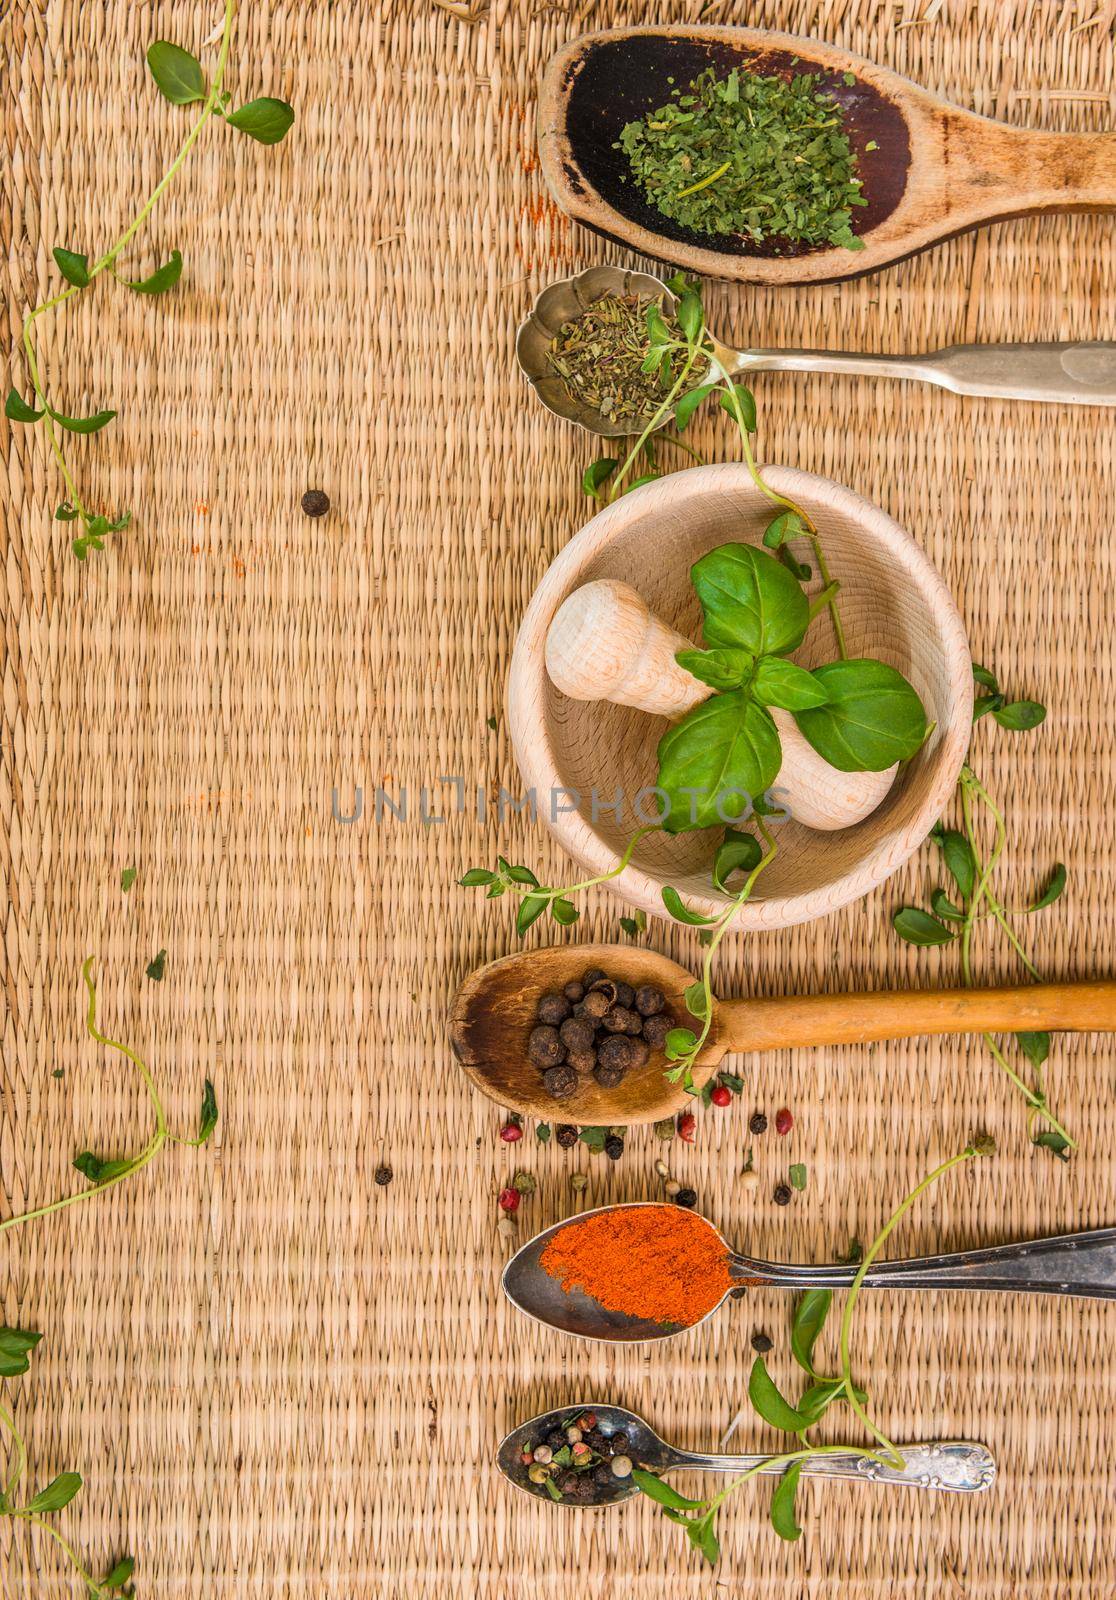 mortar with herbs and spices on a straw mat background